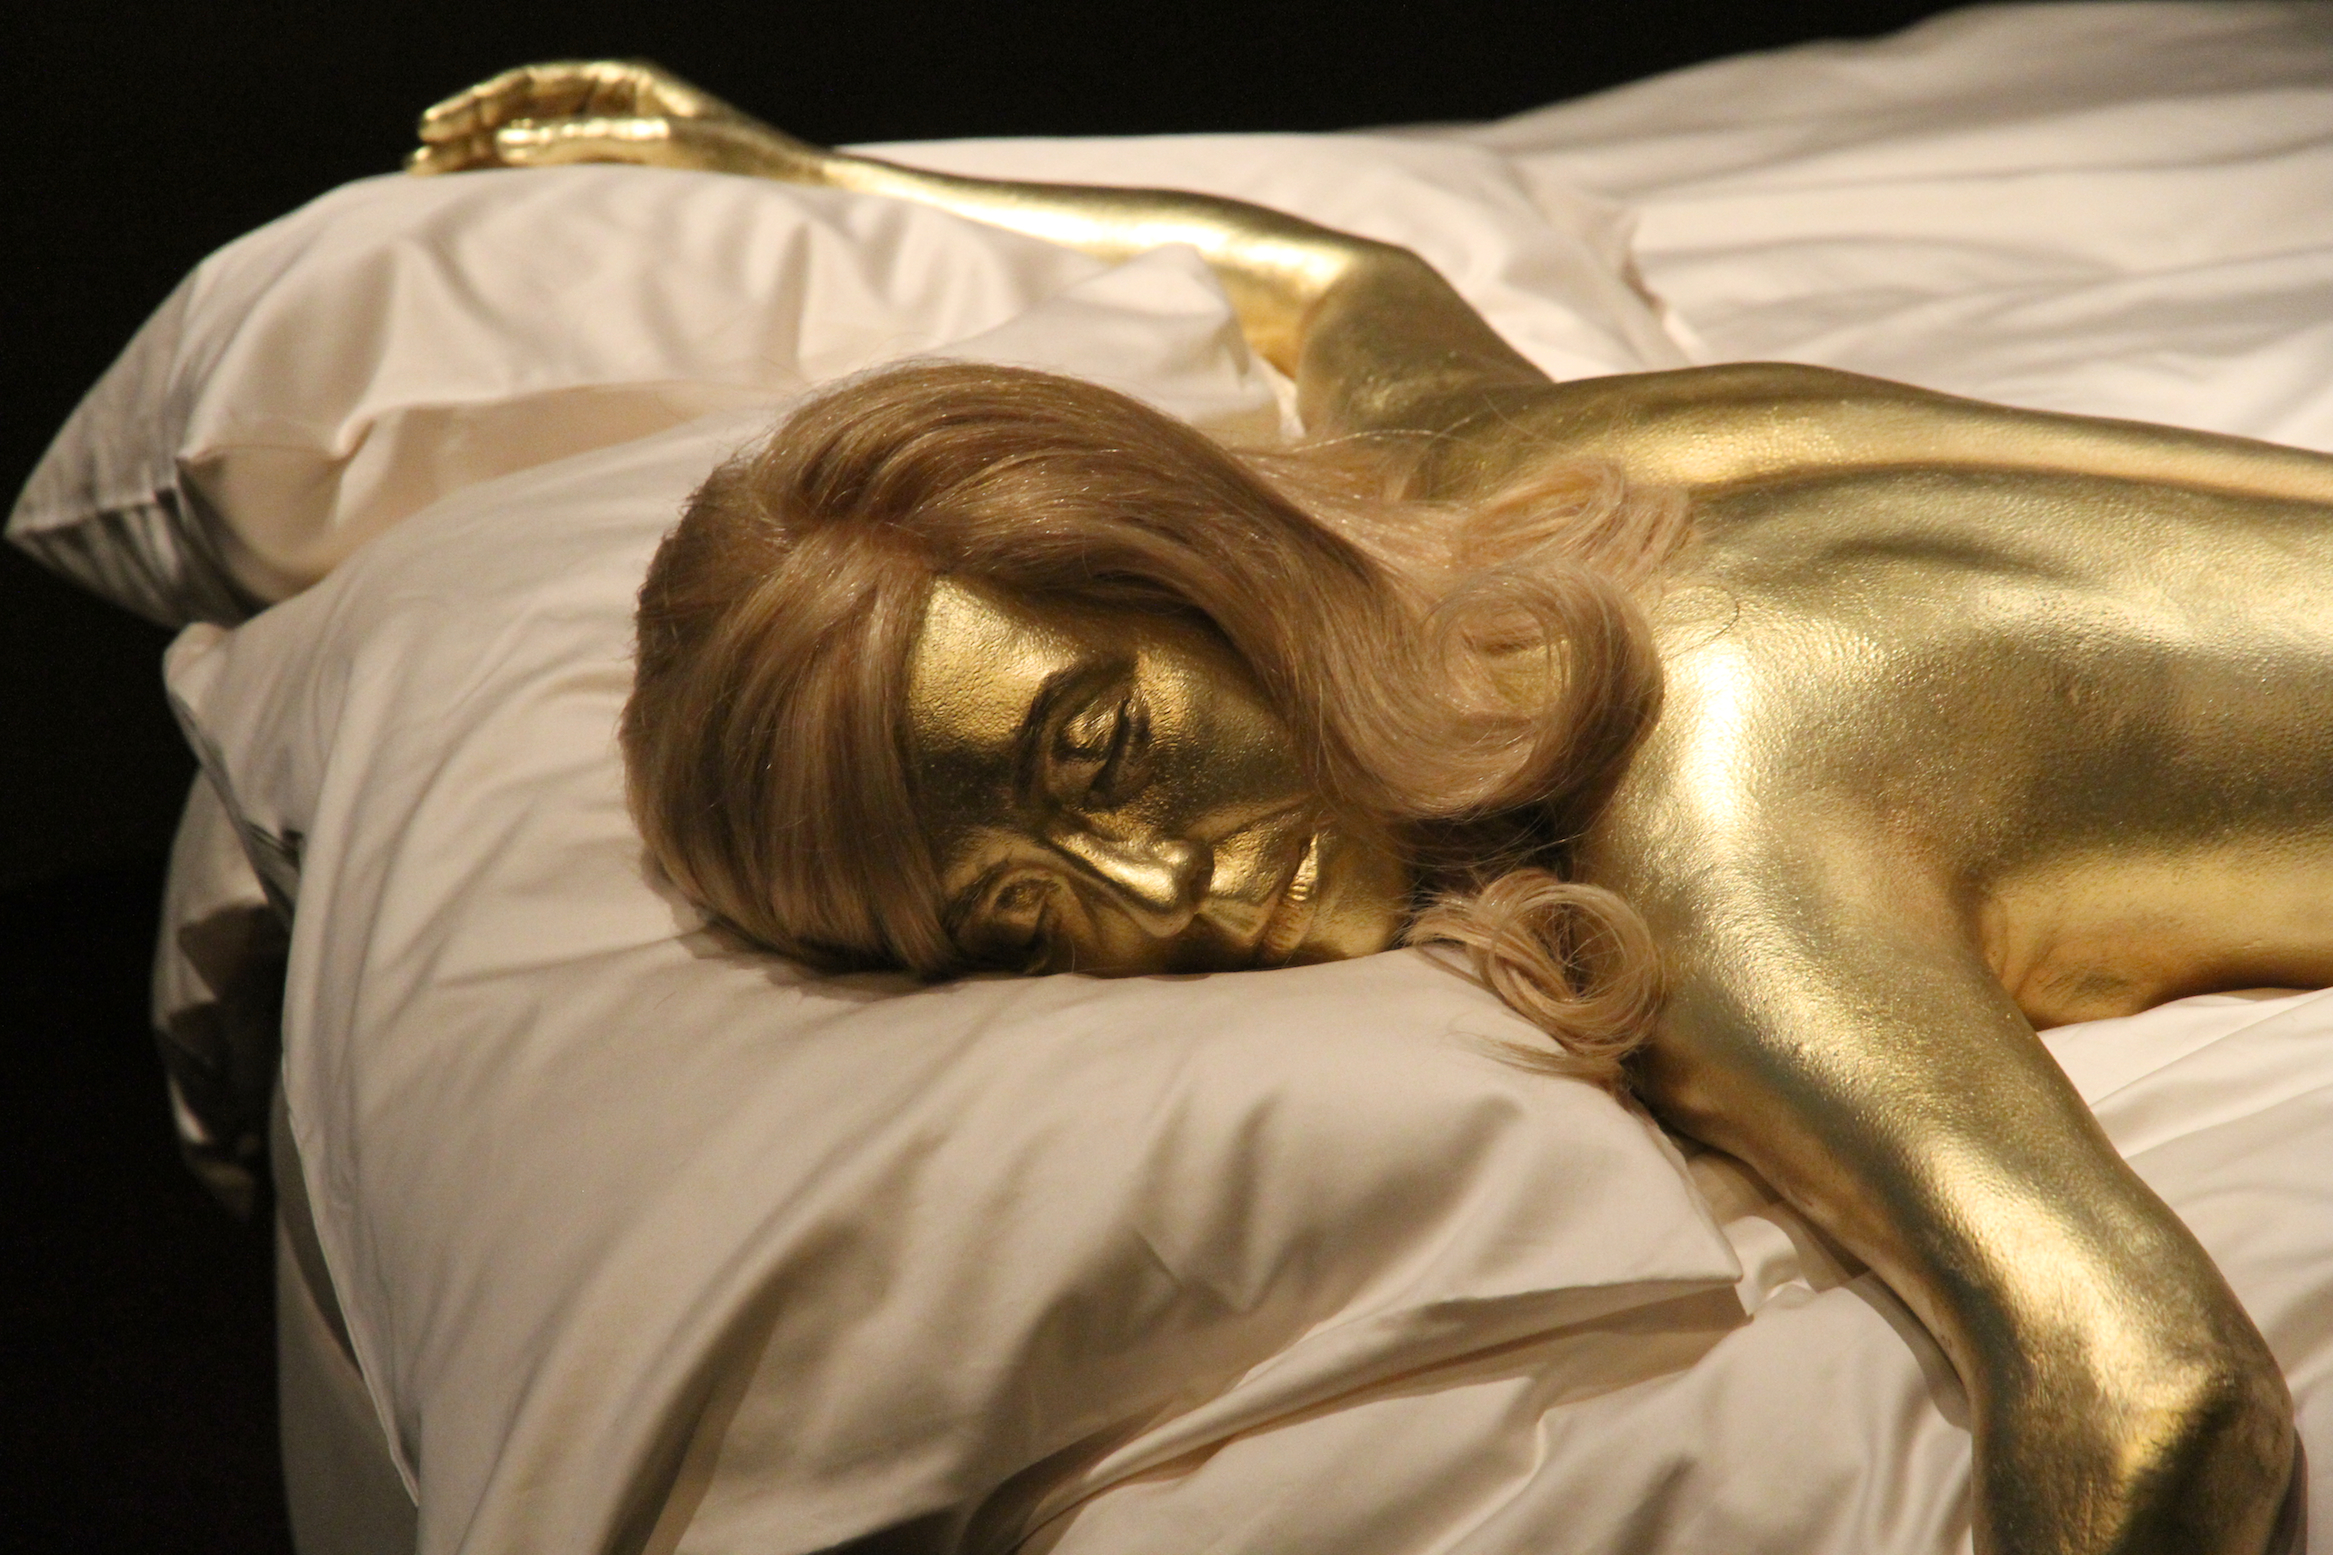 A Reproduction of the gold-painted Shirley Eaton as Jill Masterson in the film "Goldfinger," on July 5, 2012. | Source: Getty Images